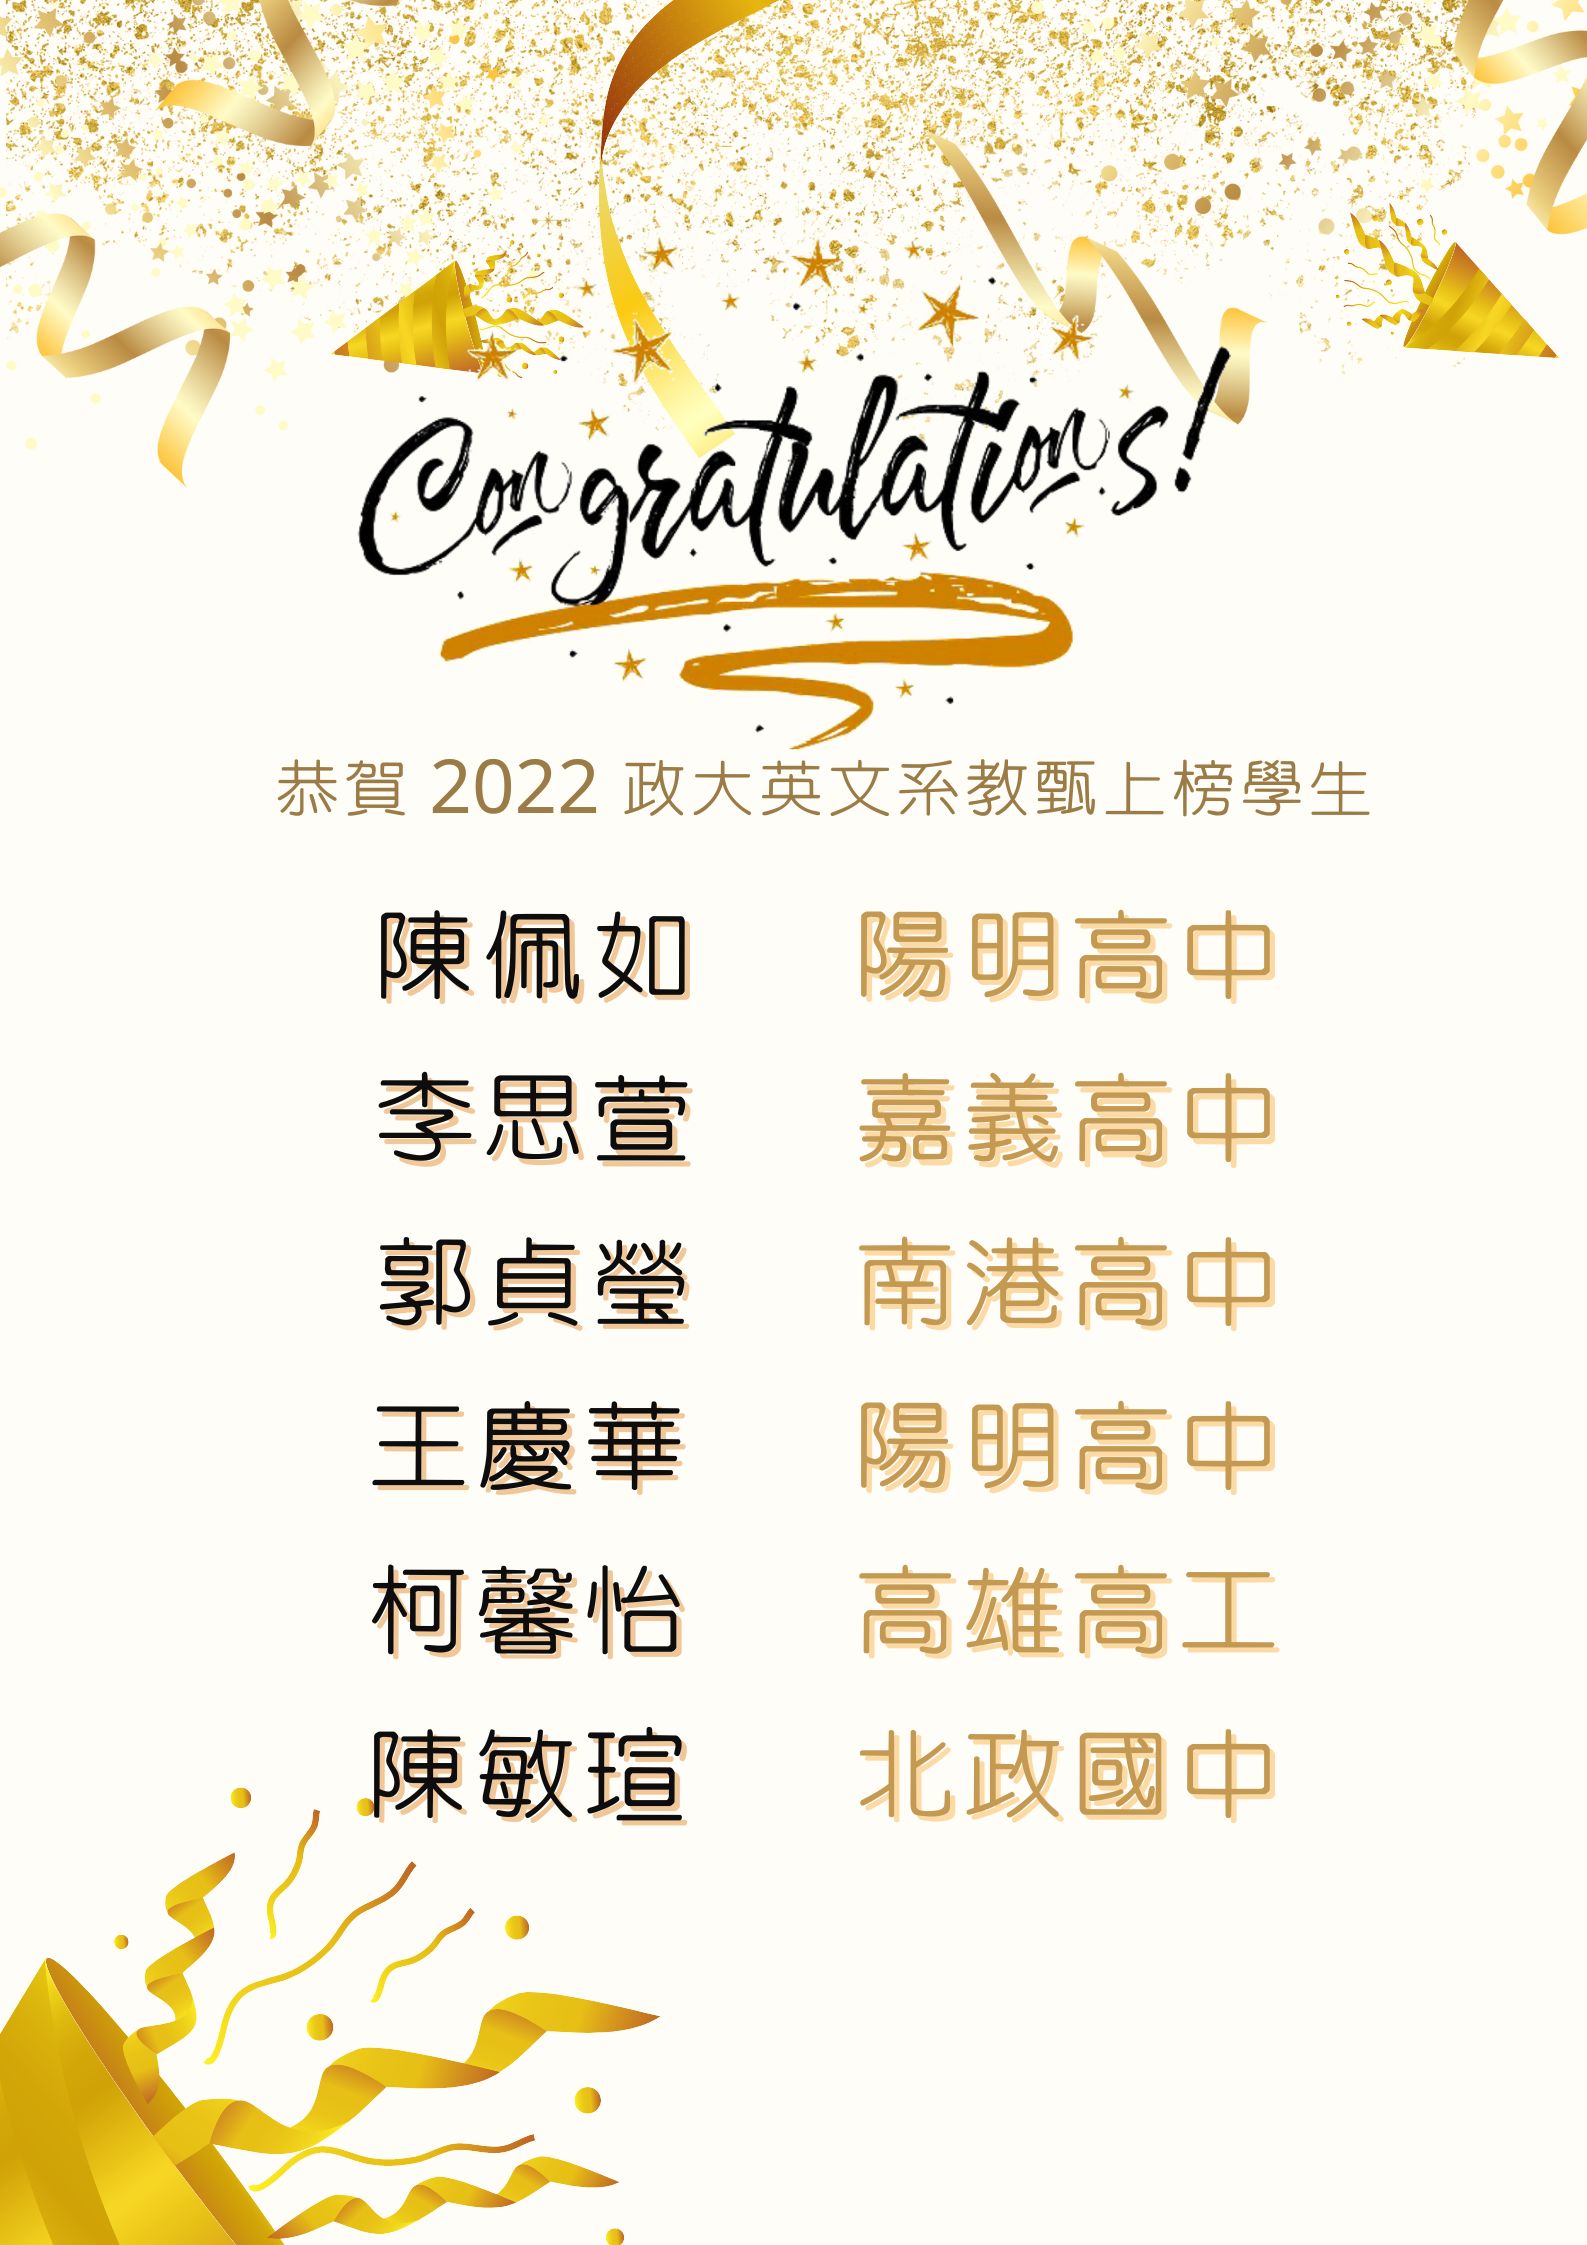 Congratulations! 6 graduates passed the teacher screening and got the offer